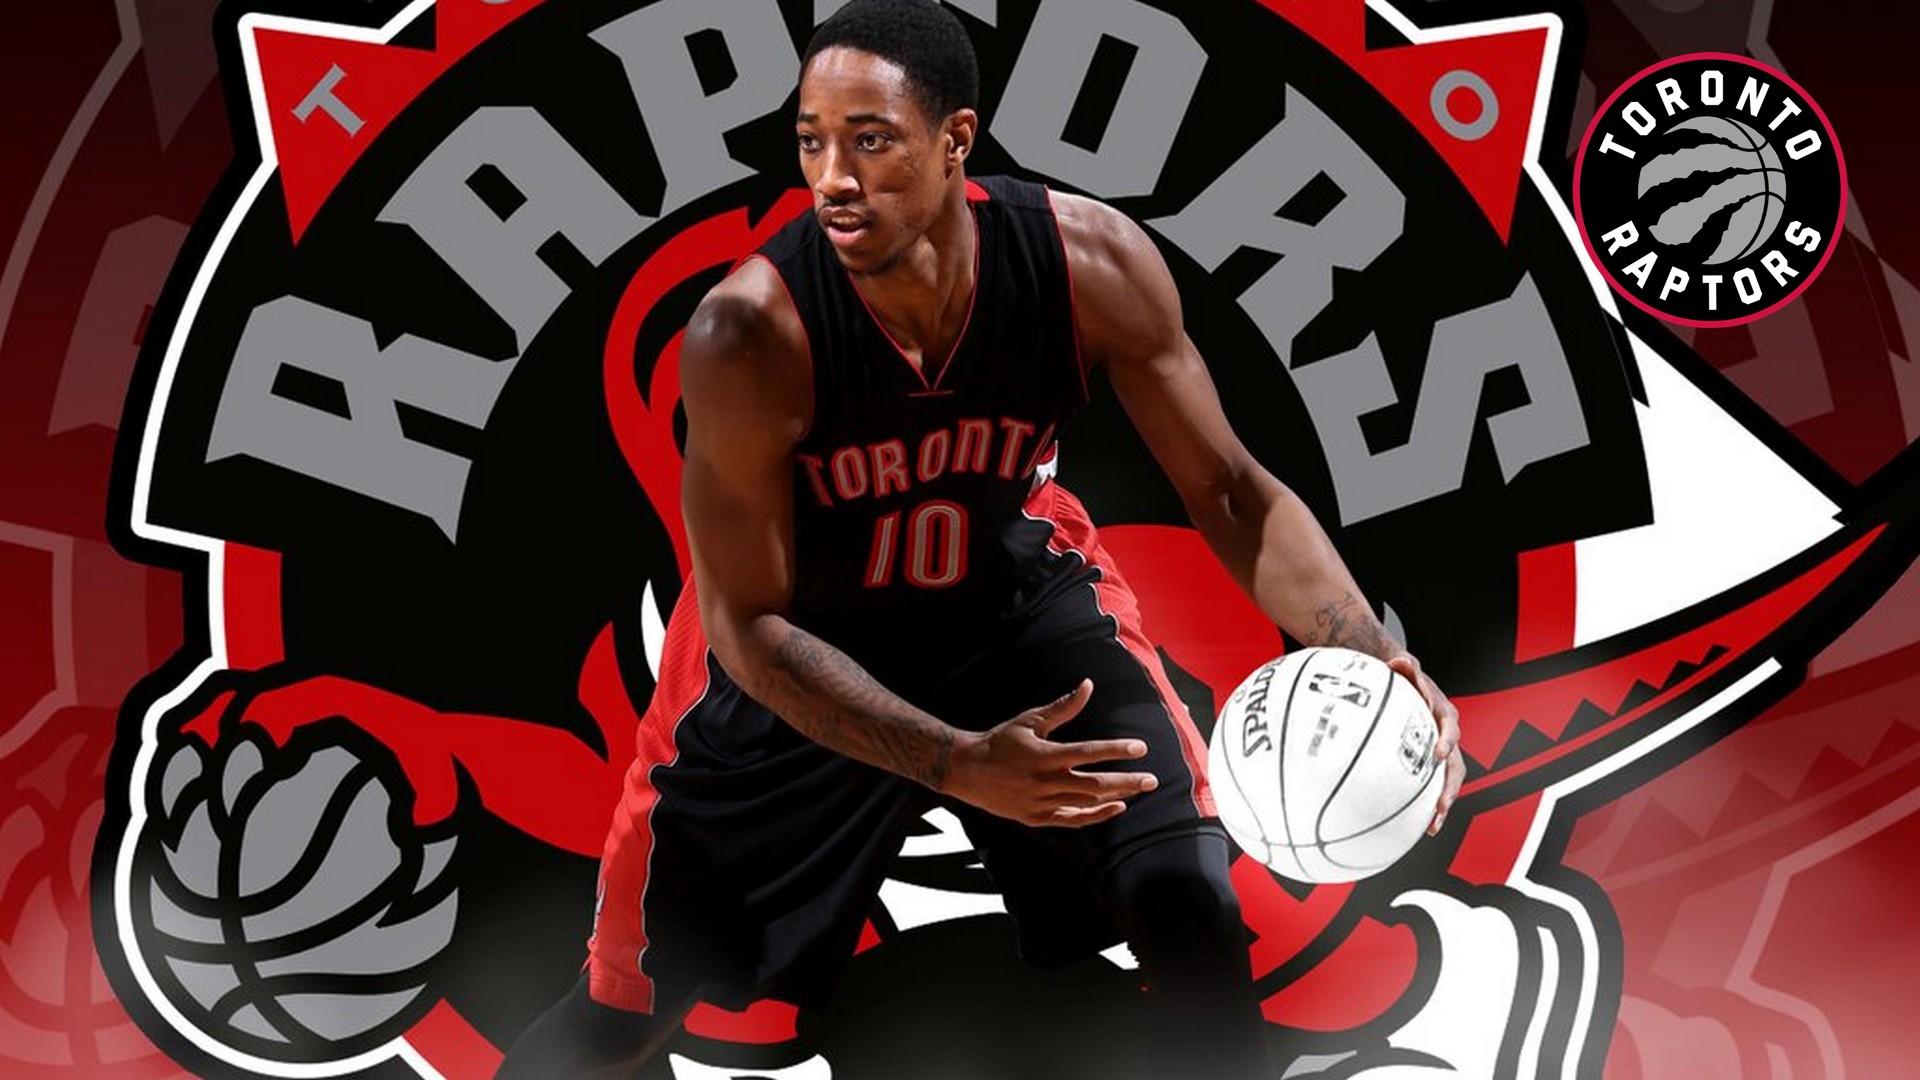 DeMar DeRozan For Desktop Wallpaper with image dimensions 1920x1080 pixel. You can make this wallpaper for your Desktop Computer Backgrounds, Windows or Mac Screensavers, iPhone Lock screen, Tablet or Android and another Mobile Phone device